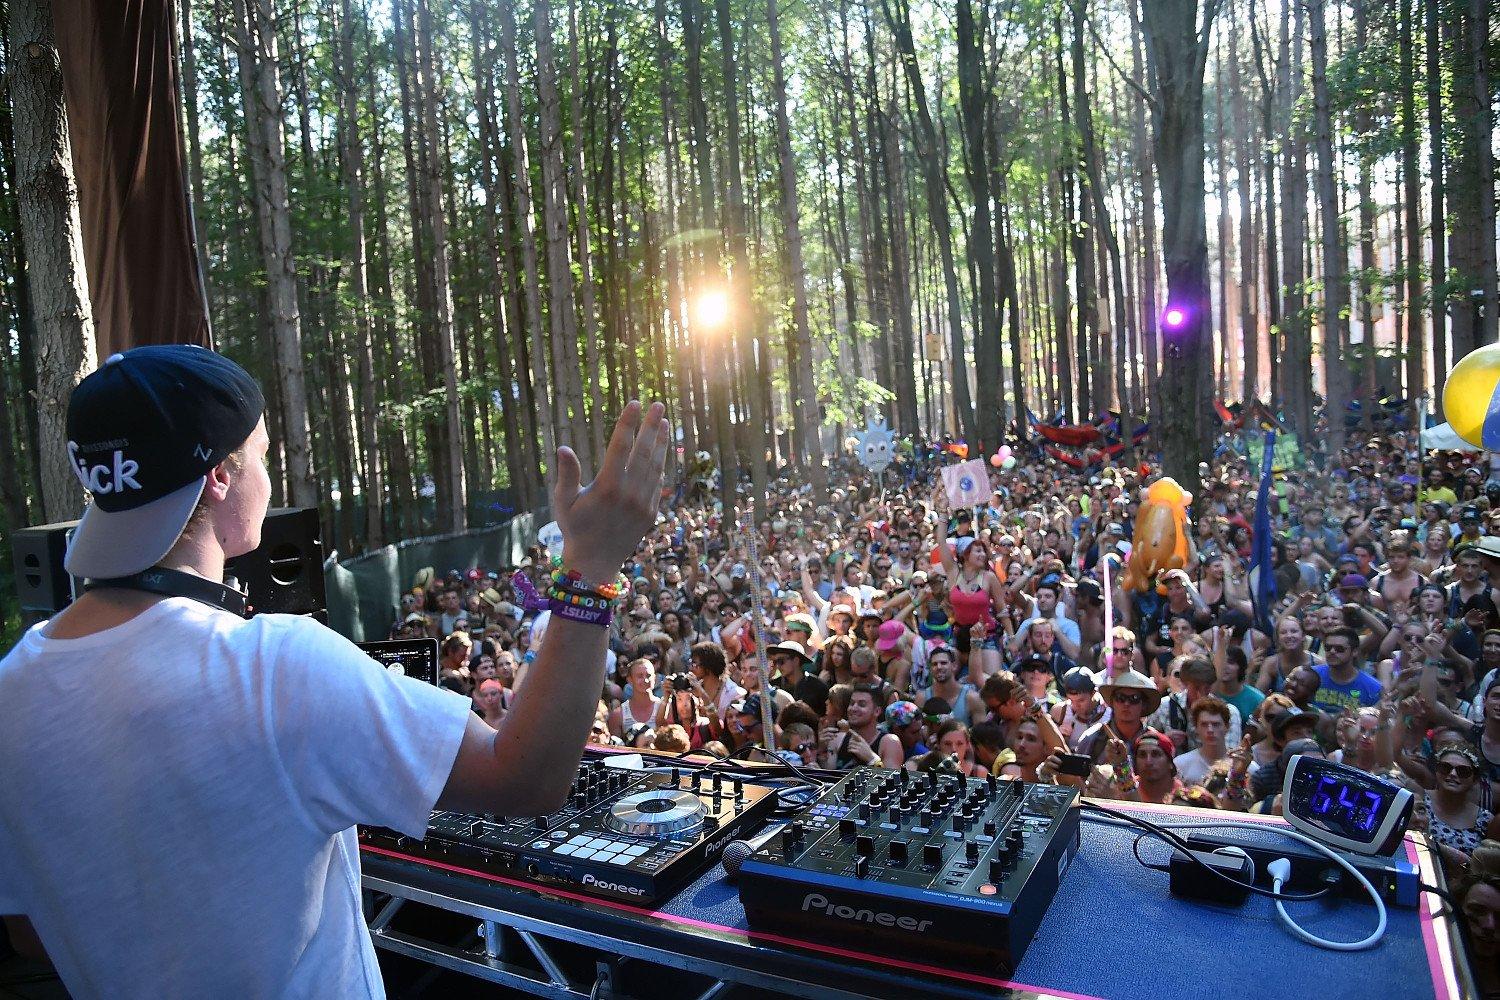 Kygo at Electric Forest 2014